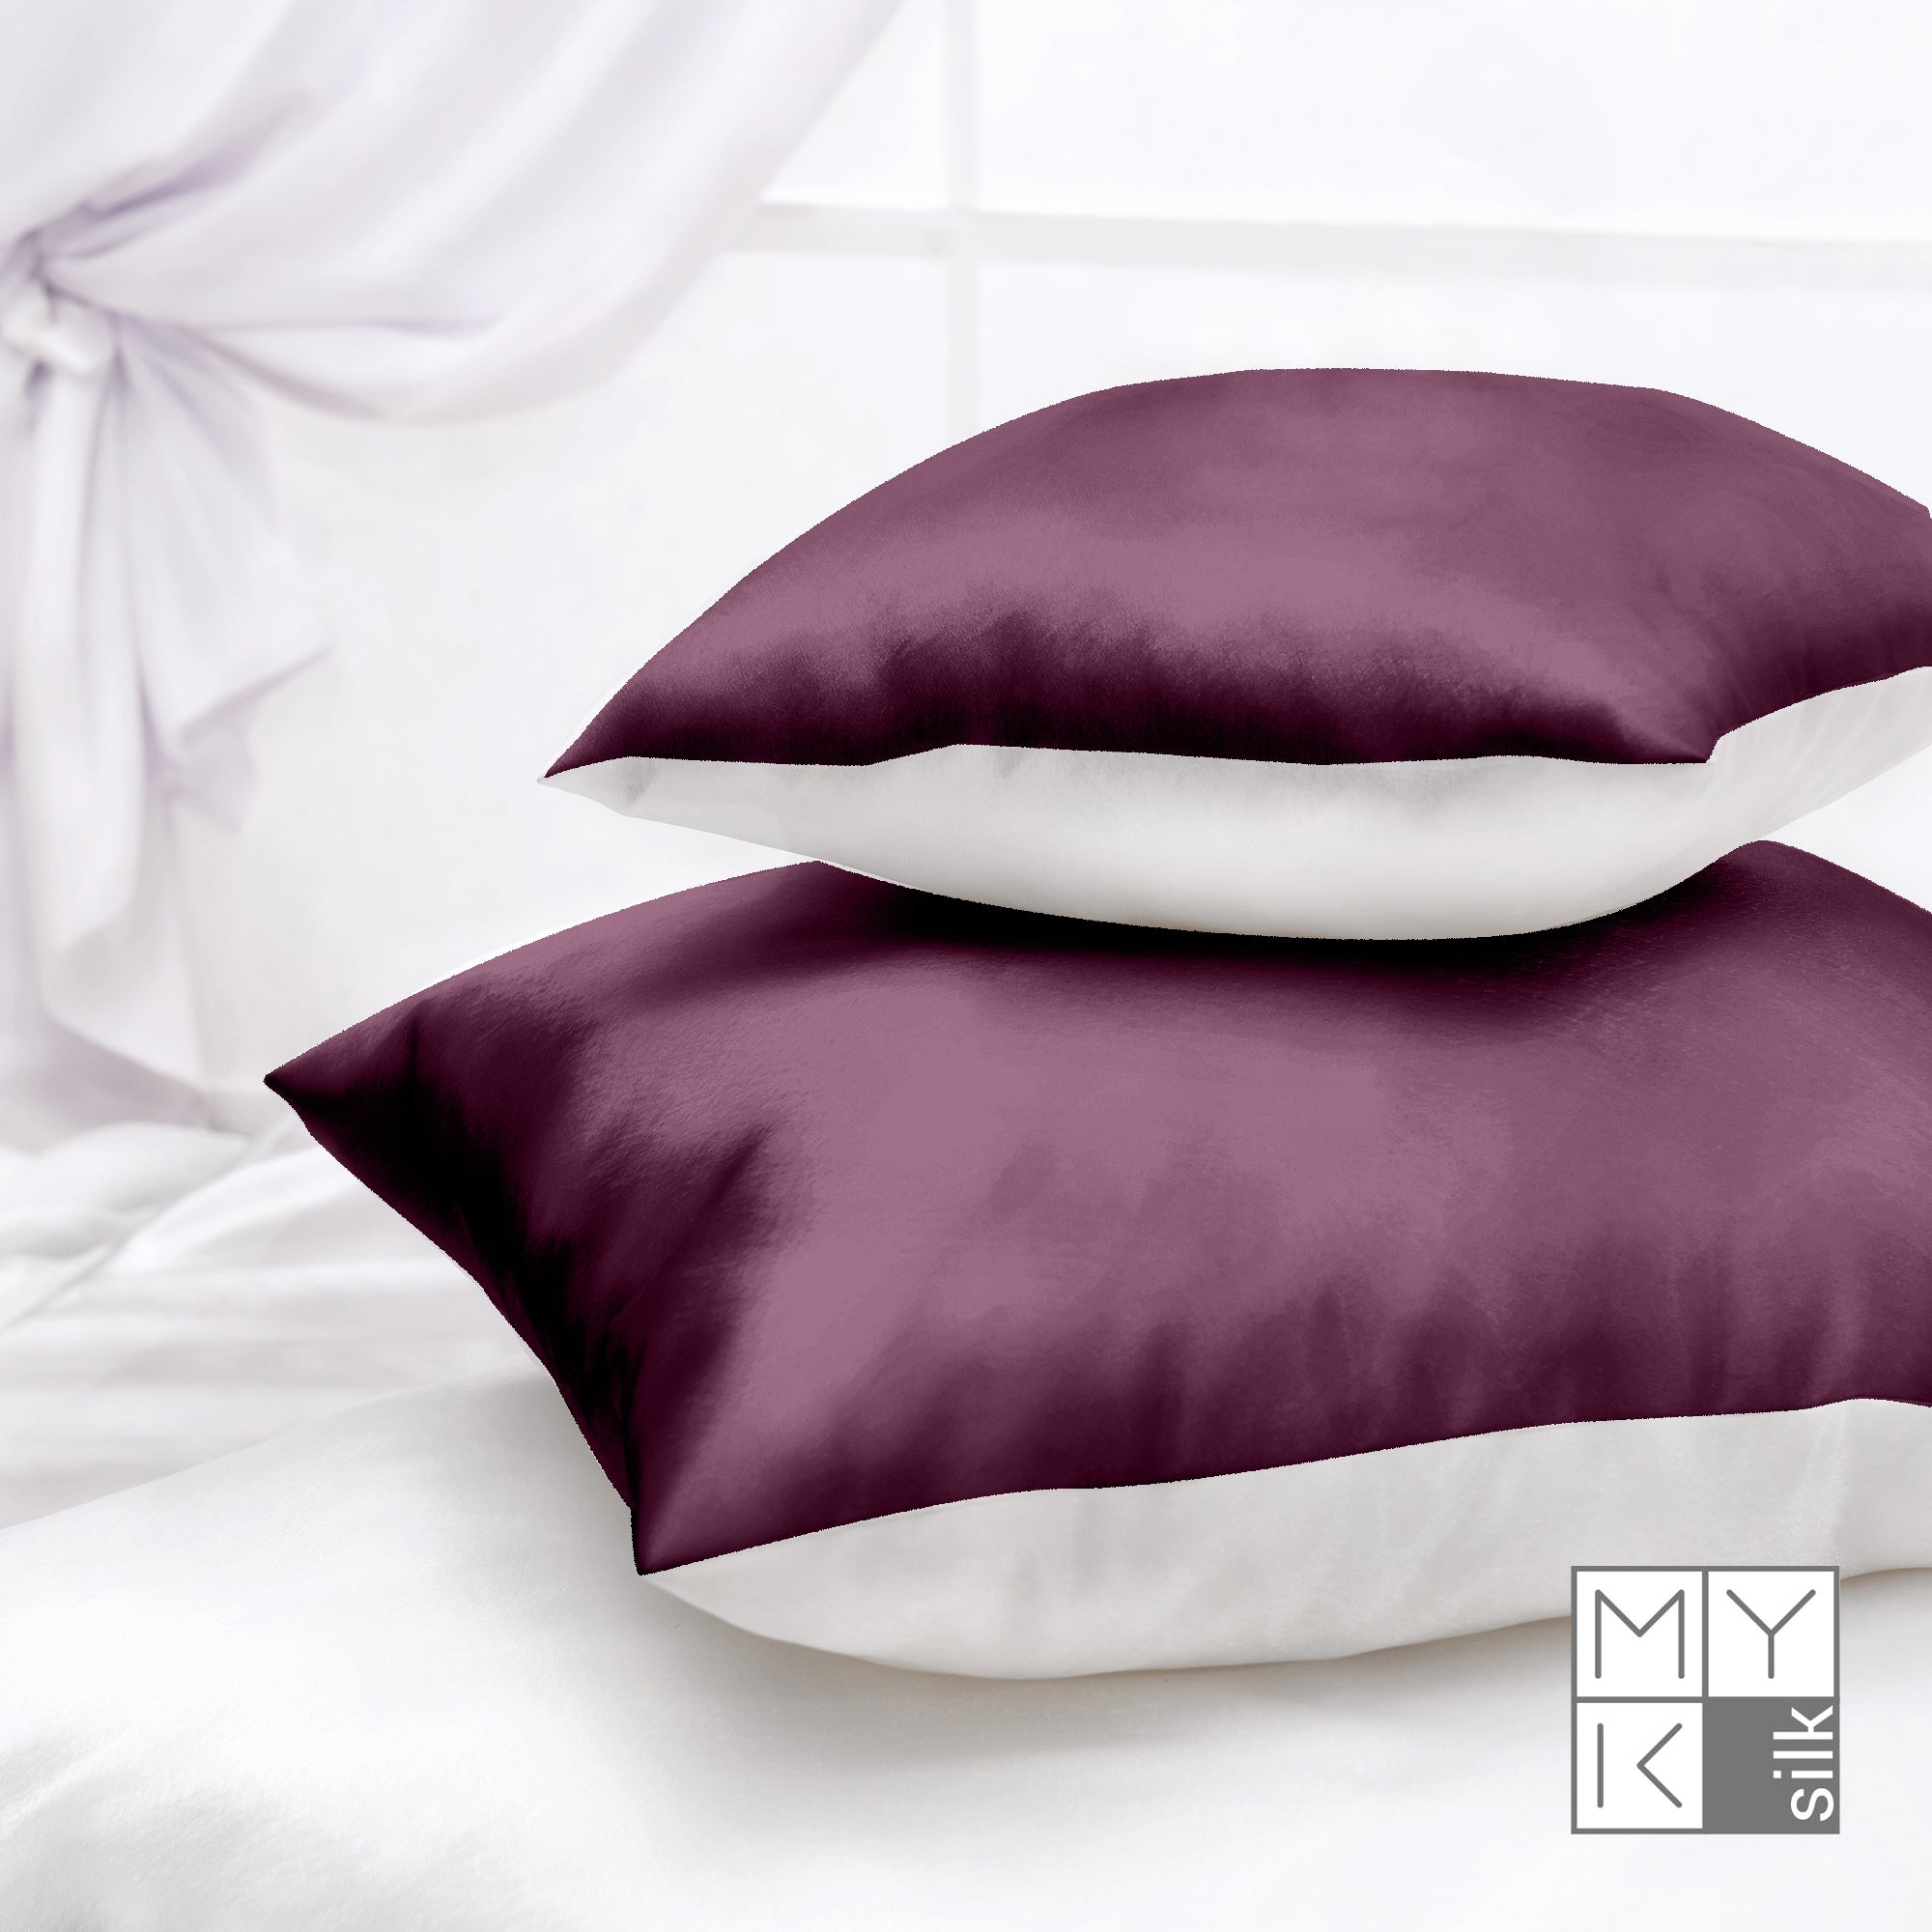 Products Luxury Mulberry Silk Pillowcase with Cotton Underside (25 momme) - MYK Silk #color_burgundy